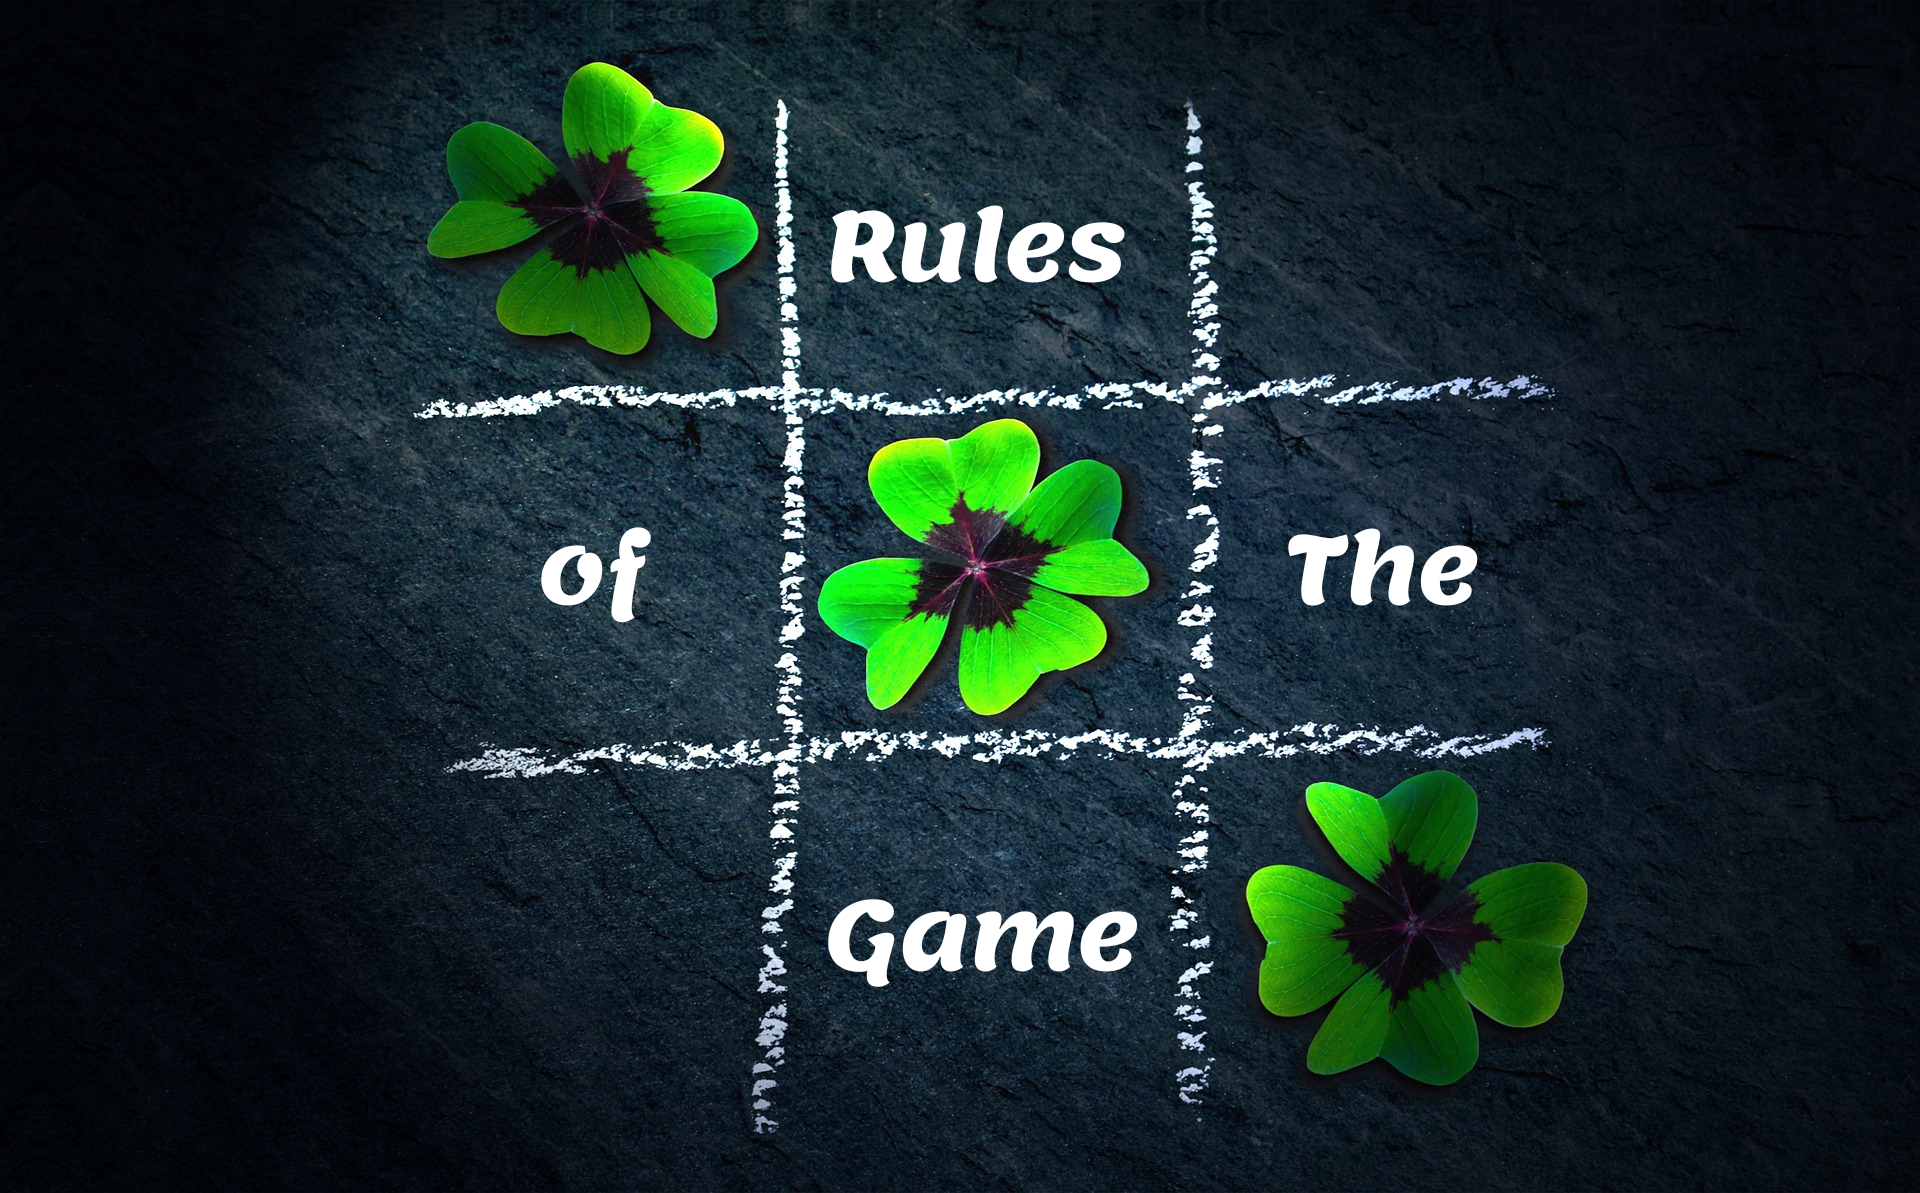 Rules of the Game by Amy Tan